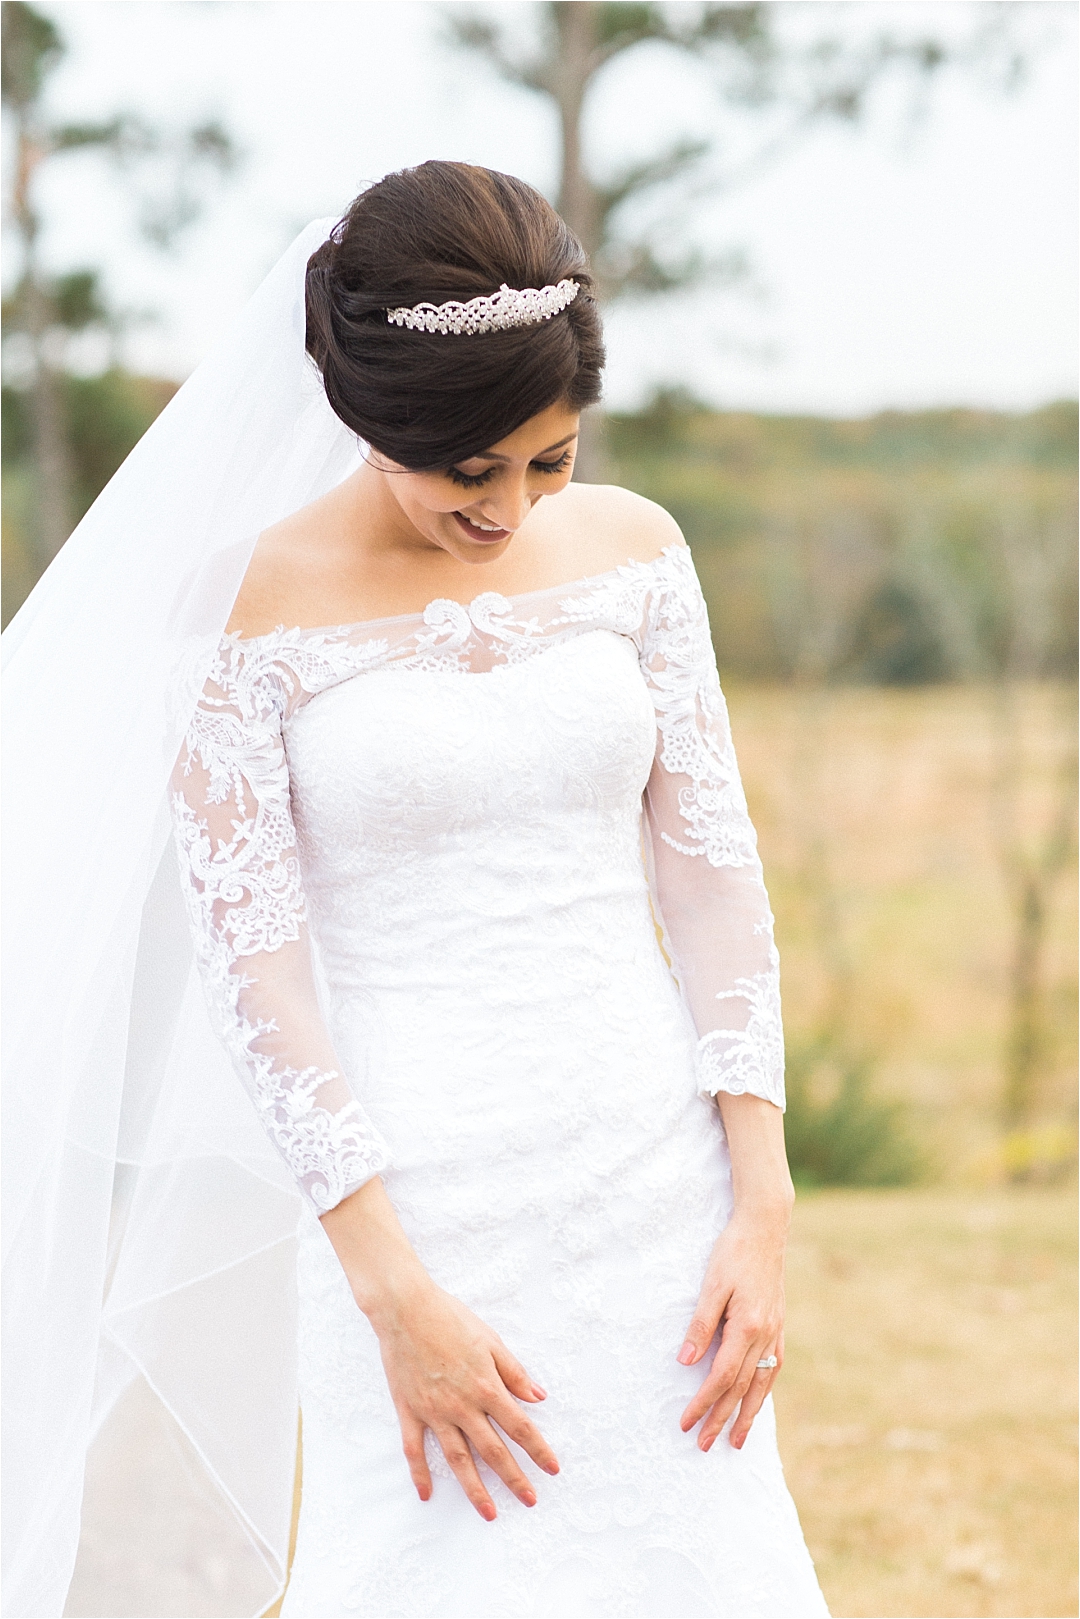 bride in lace wedding gown and veil_Photos by Leigh Wolfe, Atlanta's Top Wedding Photographer